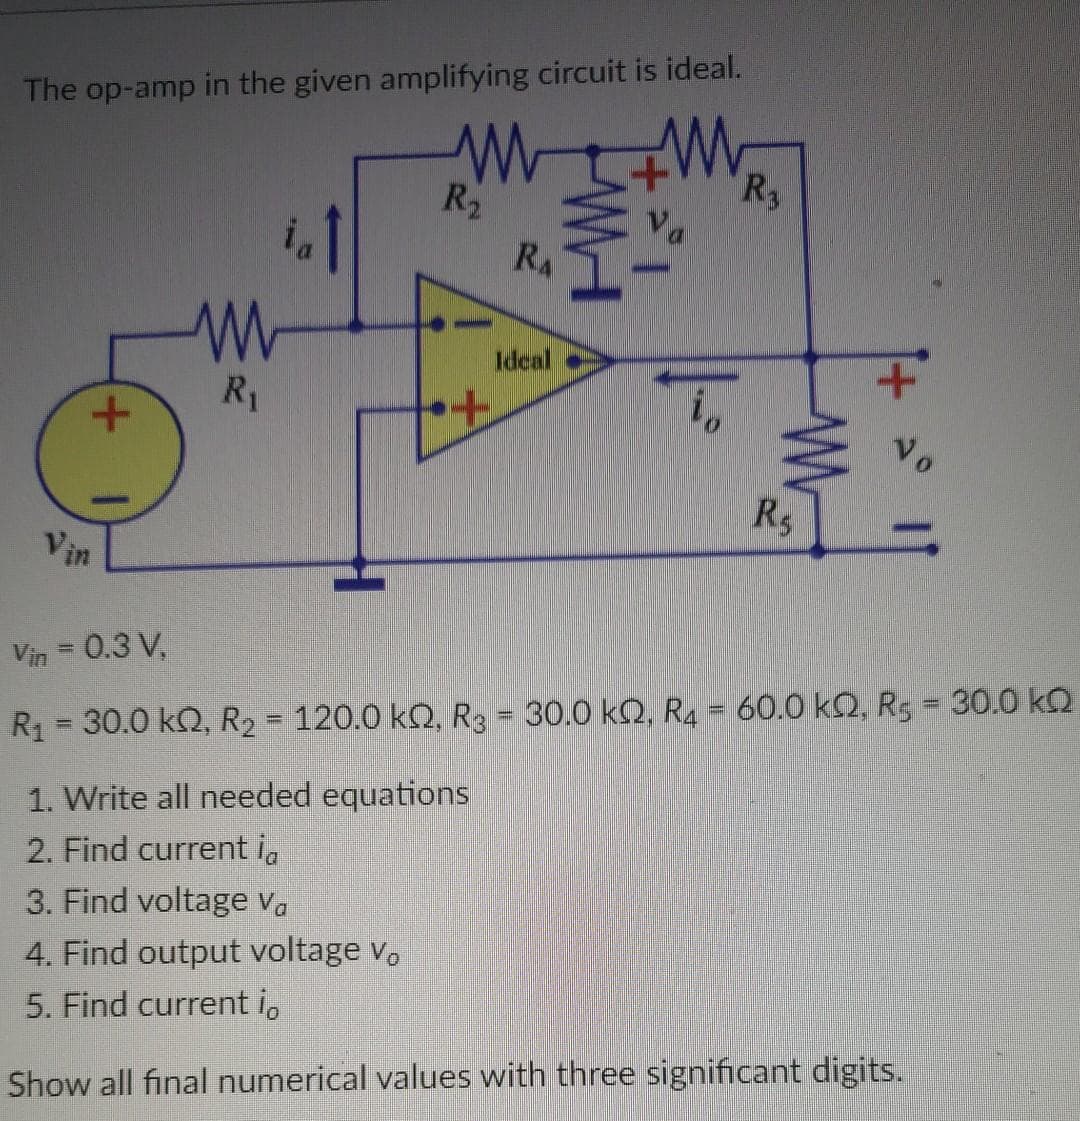 The op-amp in the given amplifying circuit is ideal.
ww
R₂
+
Vin
ww
R₁
+
RA
Ideal
||--
R₁
R$
Vo
Vin = 0.3 V,
R₁ = 30.0 kQ2, R₂ = 120.0 kQ, R3 = 30.0 kn, R4 = 60.0 k2, R5 = 30.0 kQ
1. Write all needed equations
2. Find current ia
3. Find voltage Va
4. Find output voltage vo
5. Find current i
Show all final numerical values with three significant digits.